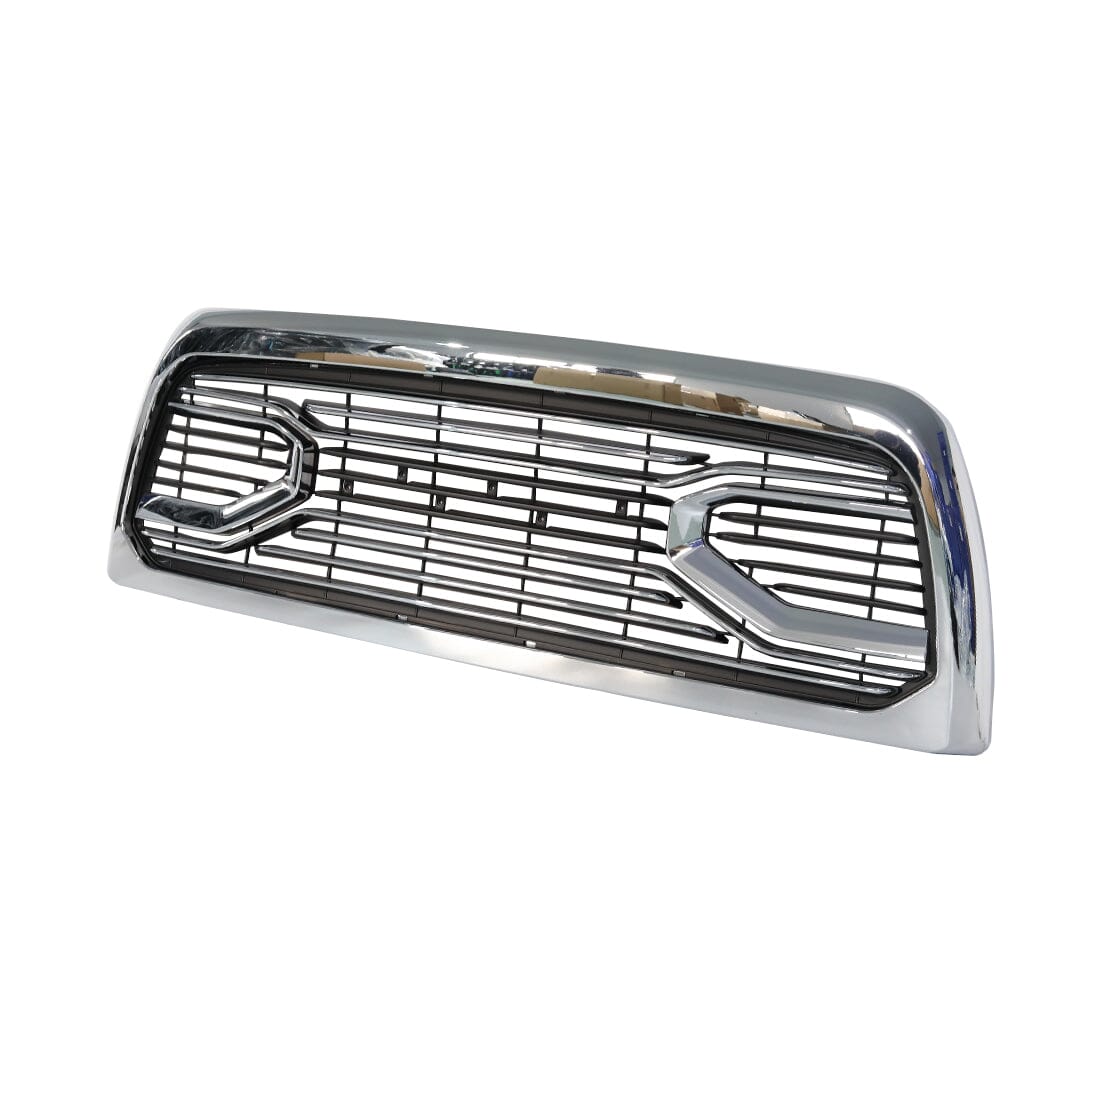 Chrome Big Horn Style Front Grille For 2010-2019 Dodge Ram 2500| Amoffroad